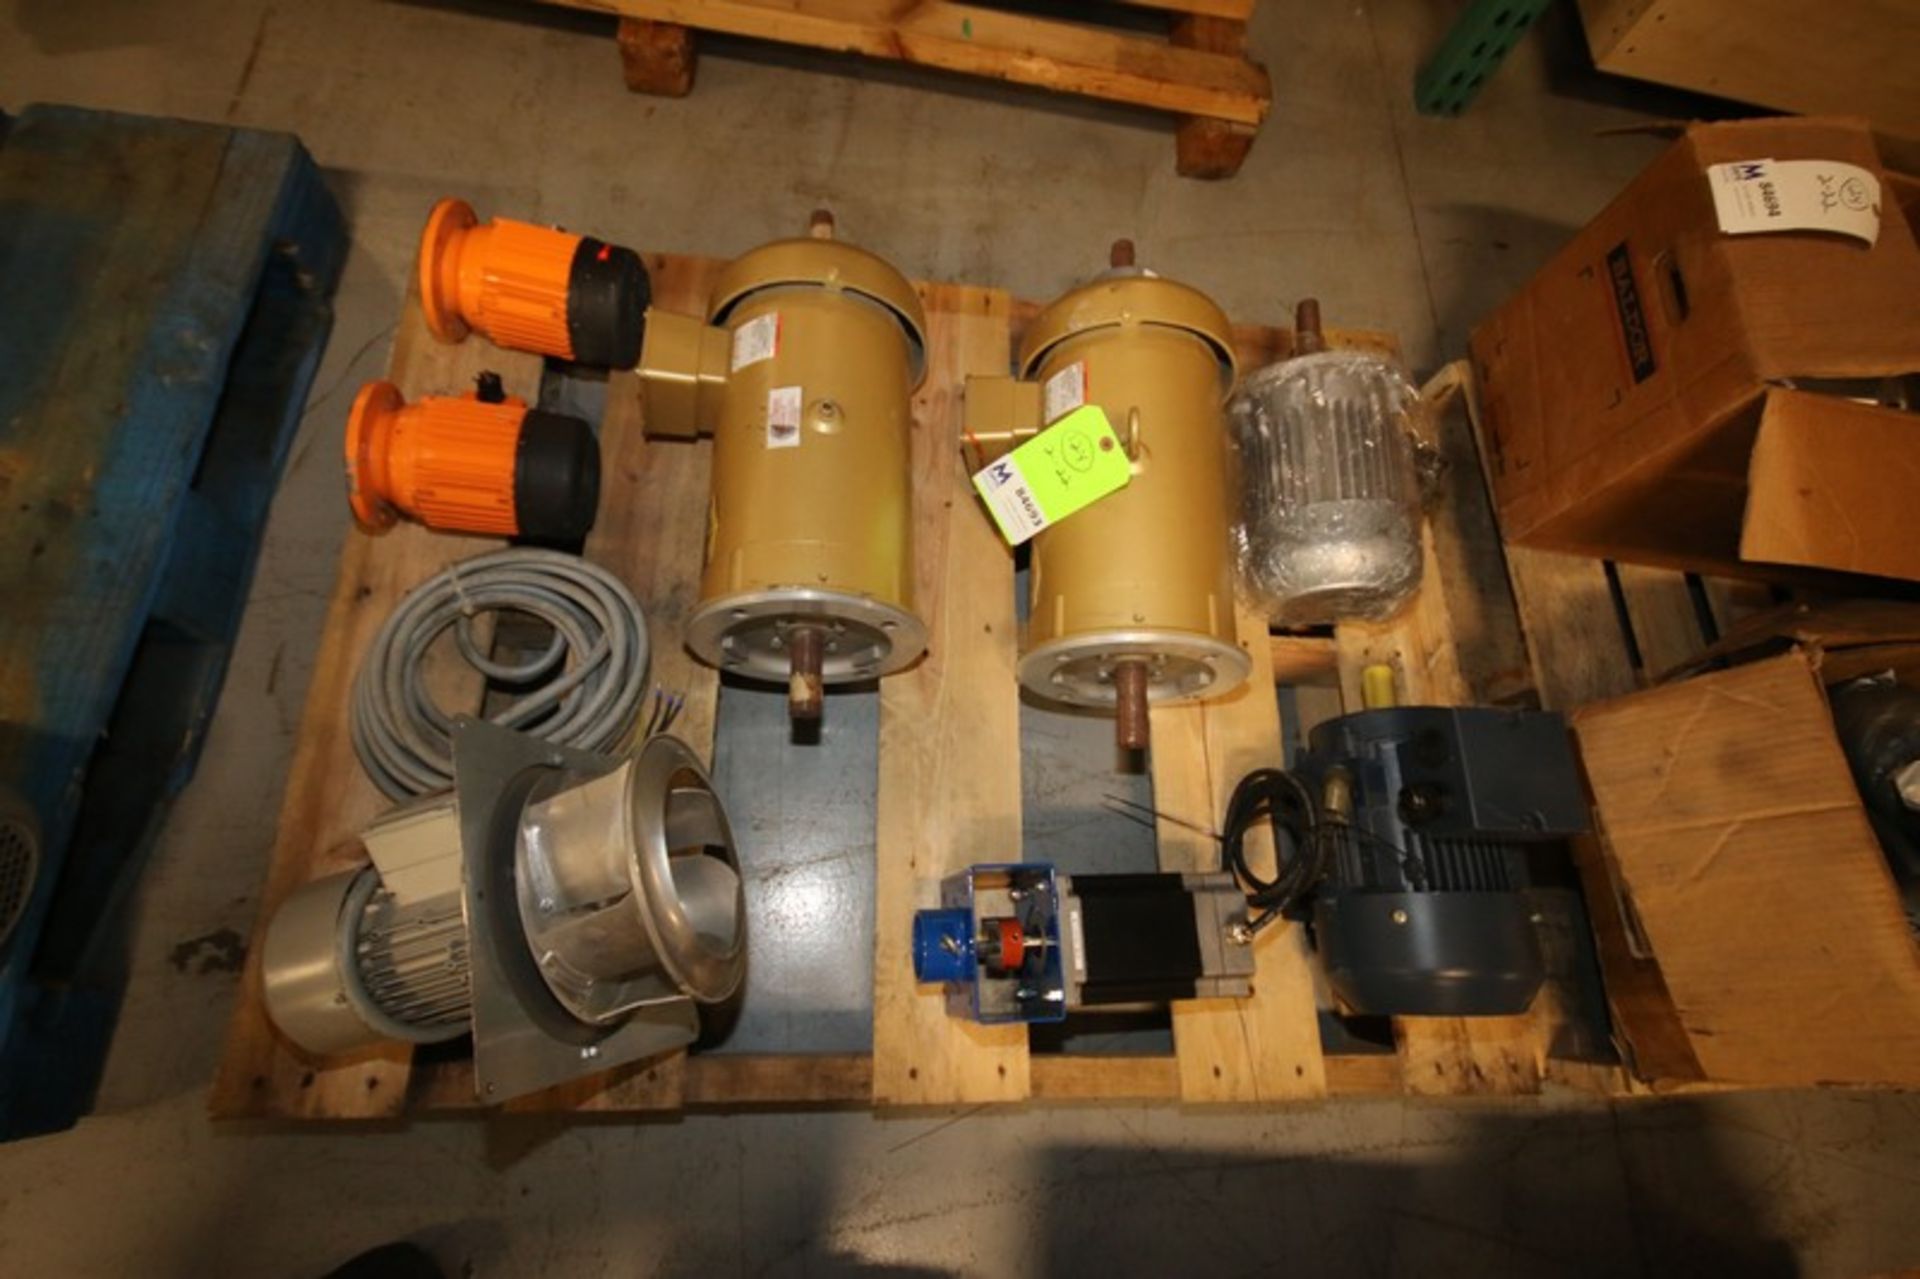 Lot of (8) New Assorted Motors by Baldor, Siemans, Leeson and Other, Fractional up to 5hp (INV#